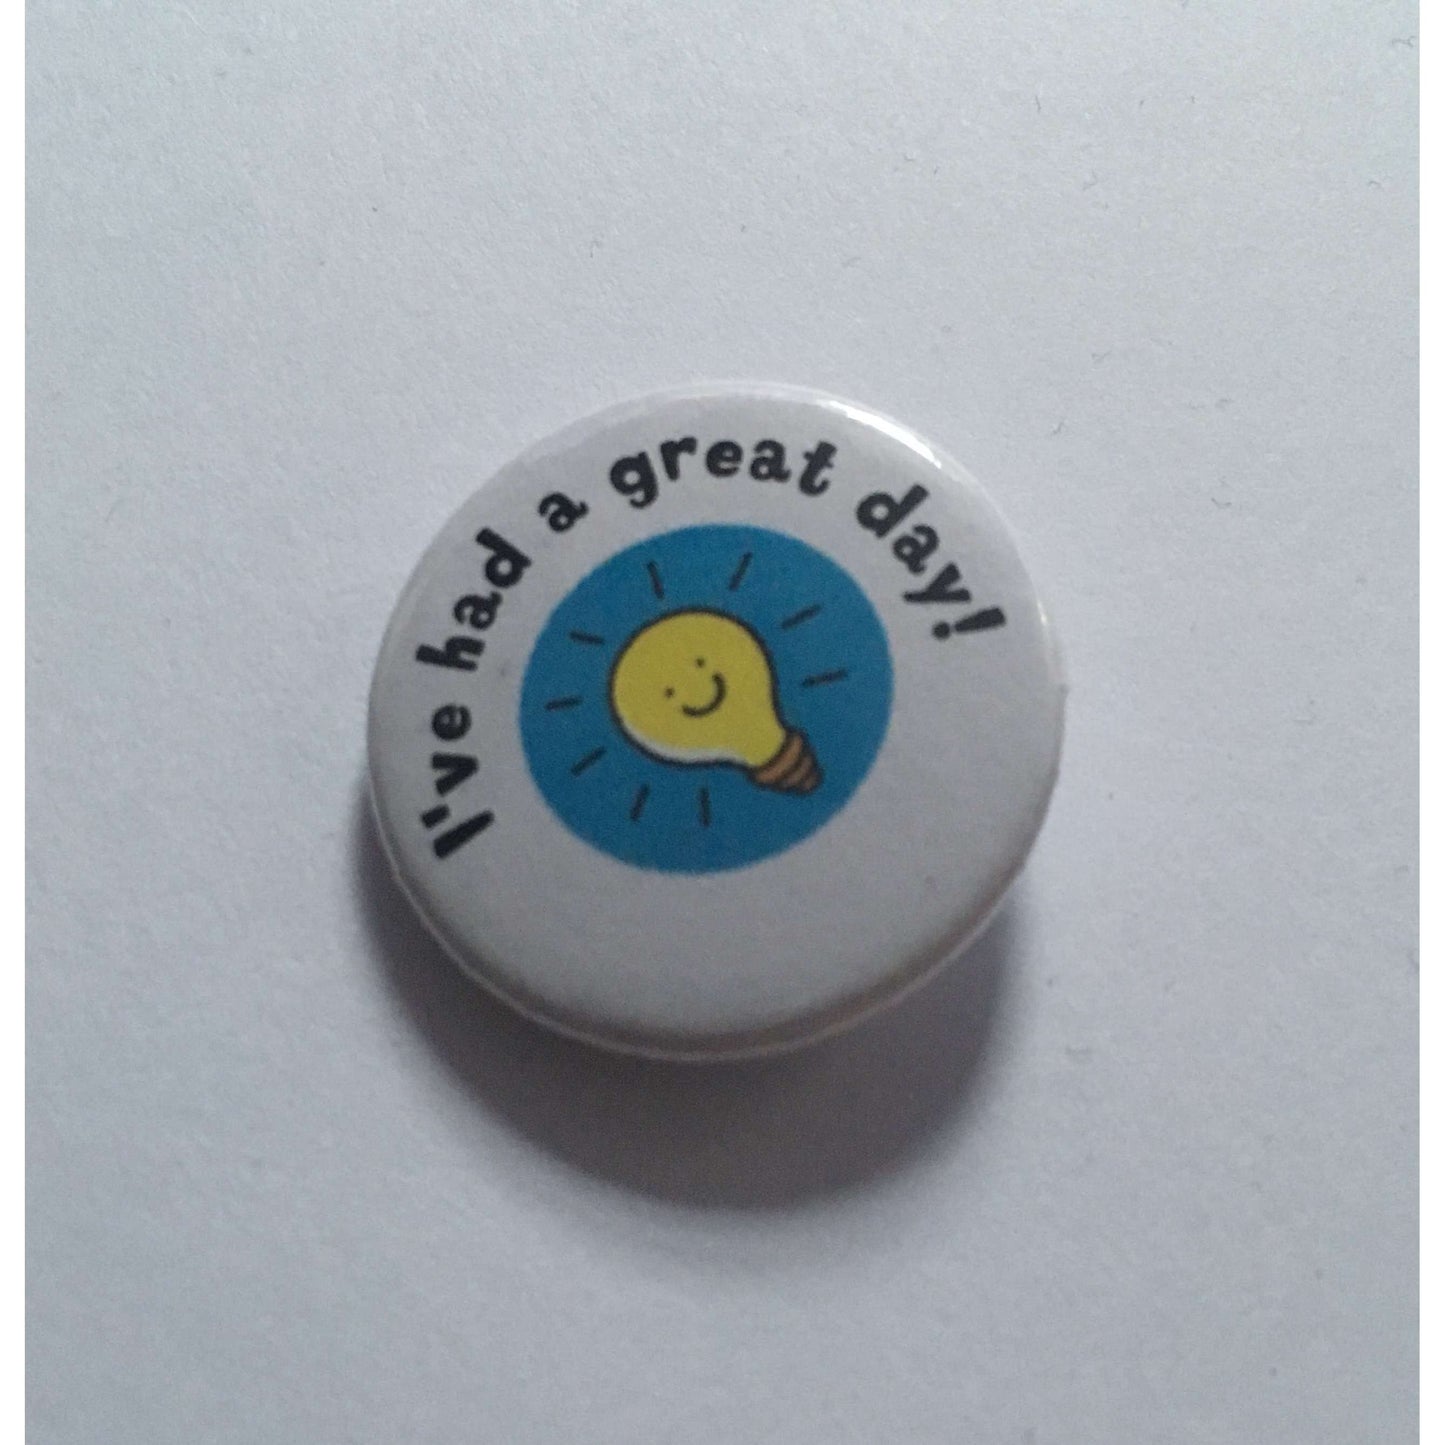 Reward Badge - Great day - Light bulb:Primary Classroom Resources